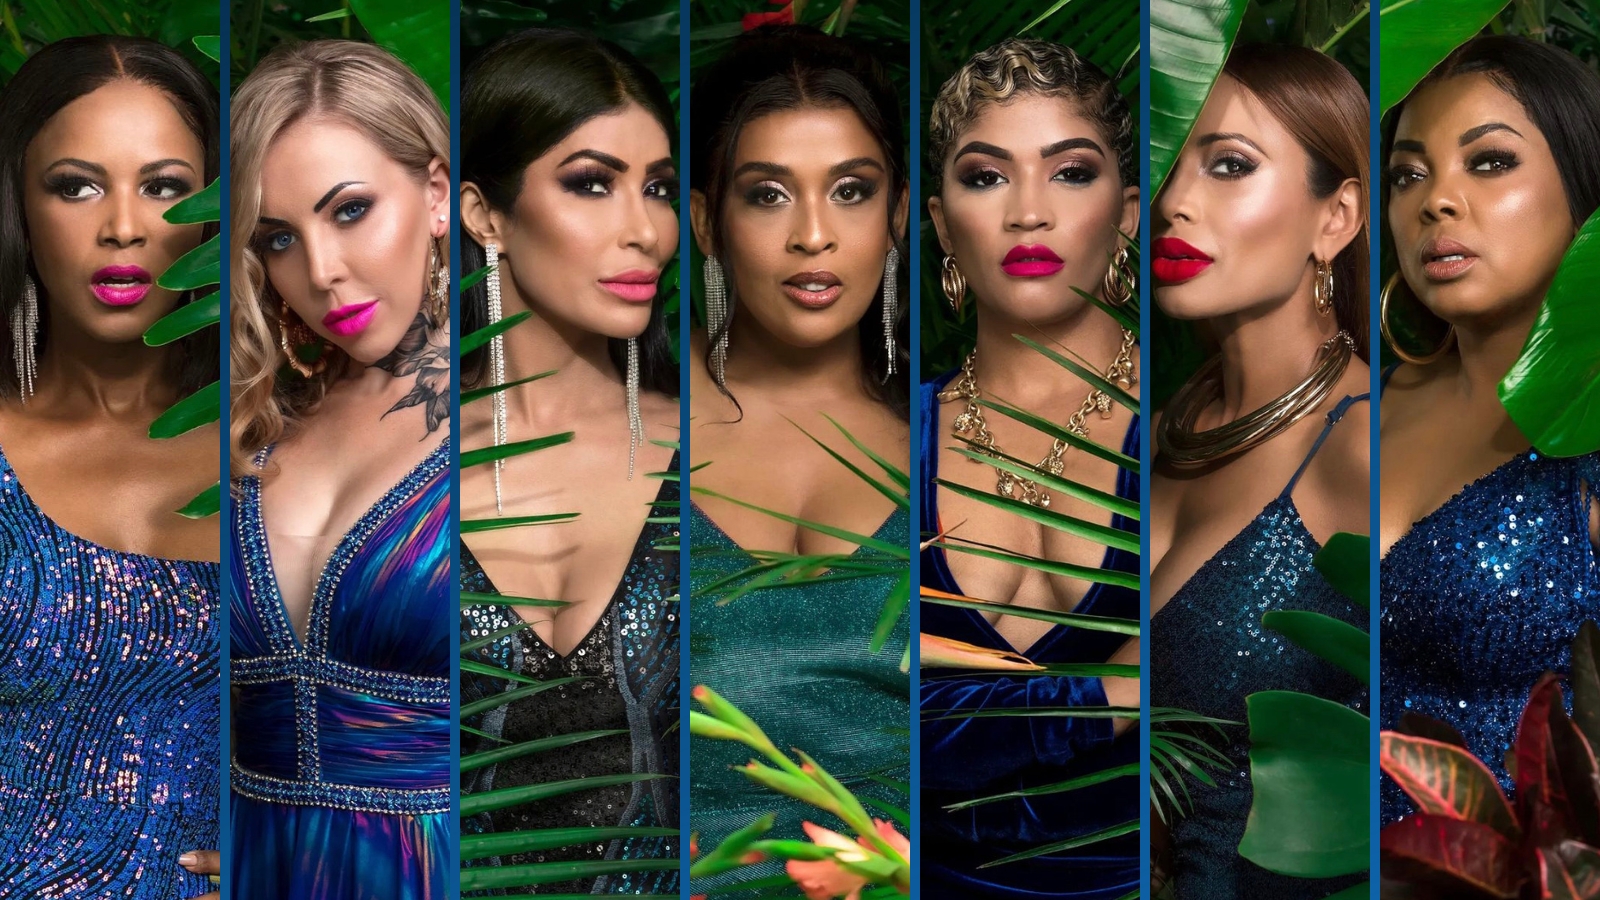 The Real Housewives of Durban Season 3 premiere, RHODurban Season 3 premiere, cast pics, bios, Showmax, South Africa